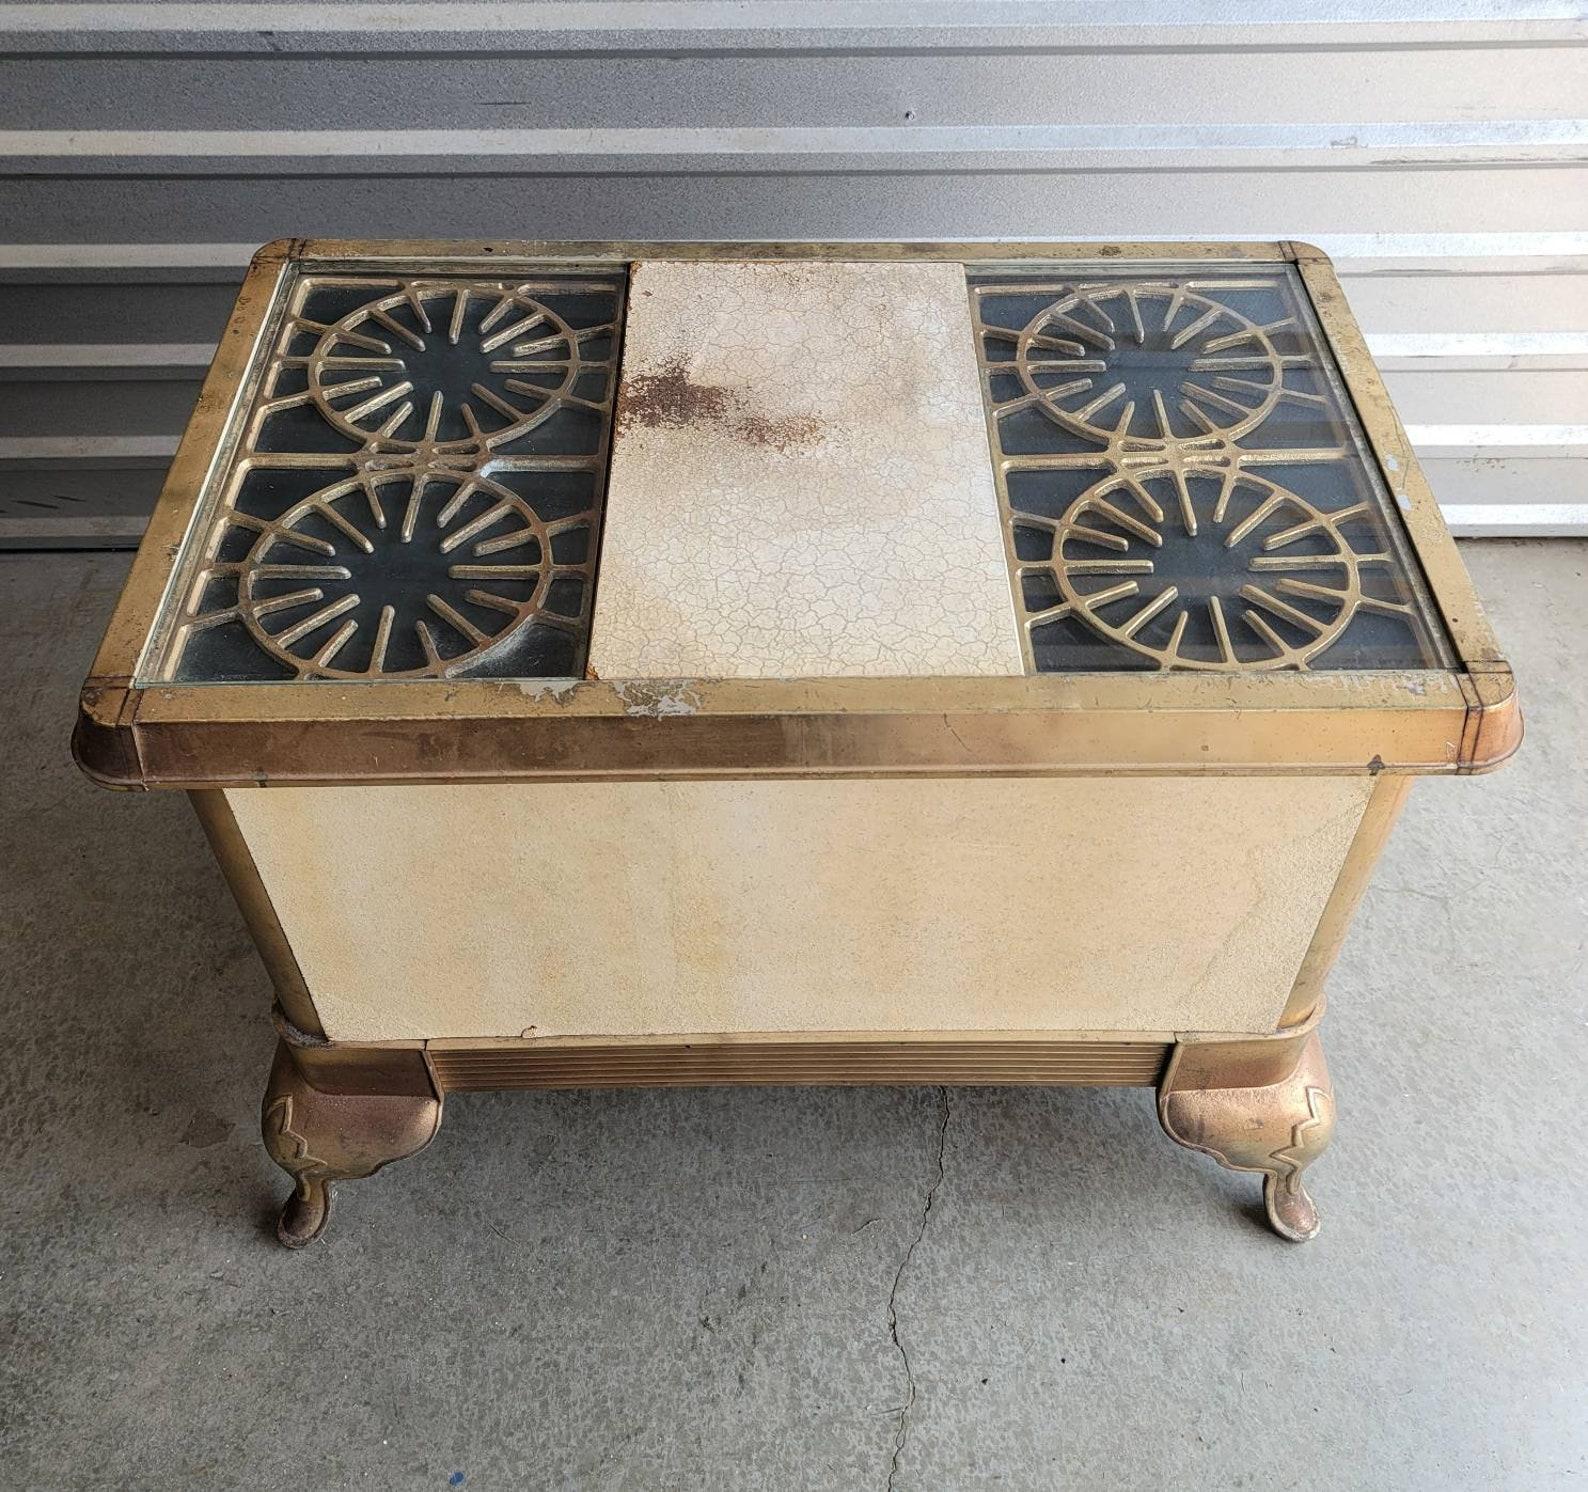 Metal Antique American Early Kitchen Stove Now Console Table For Sale